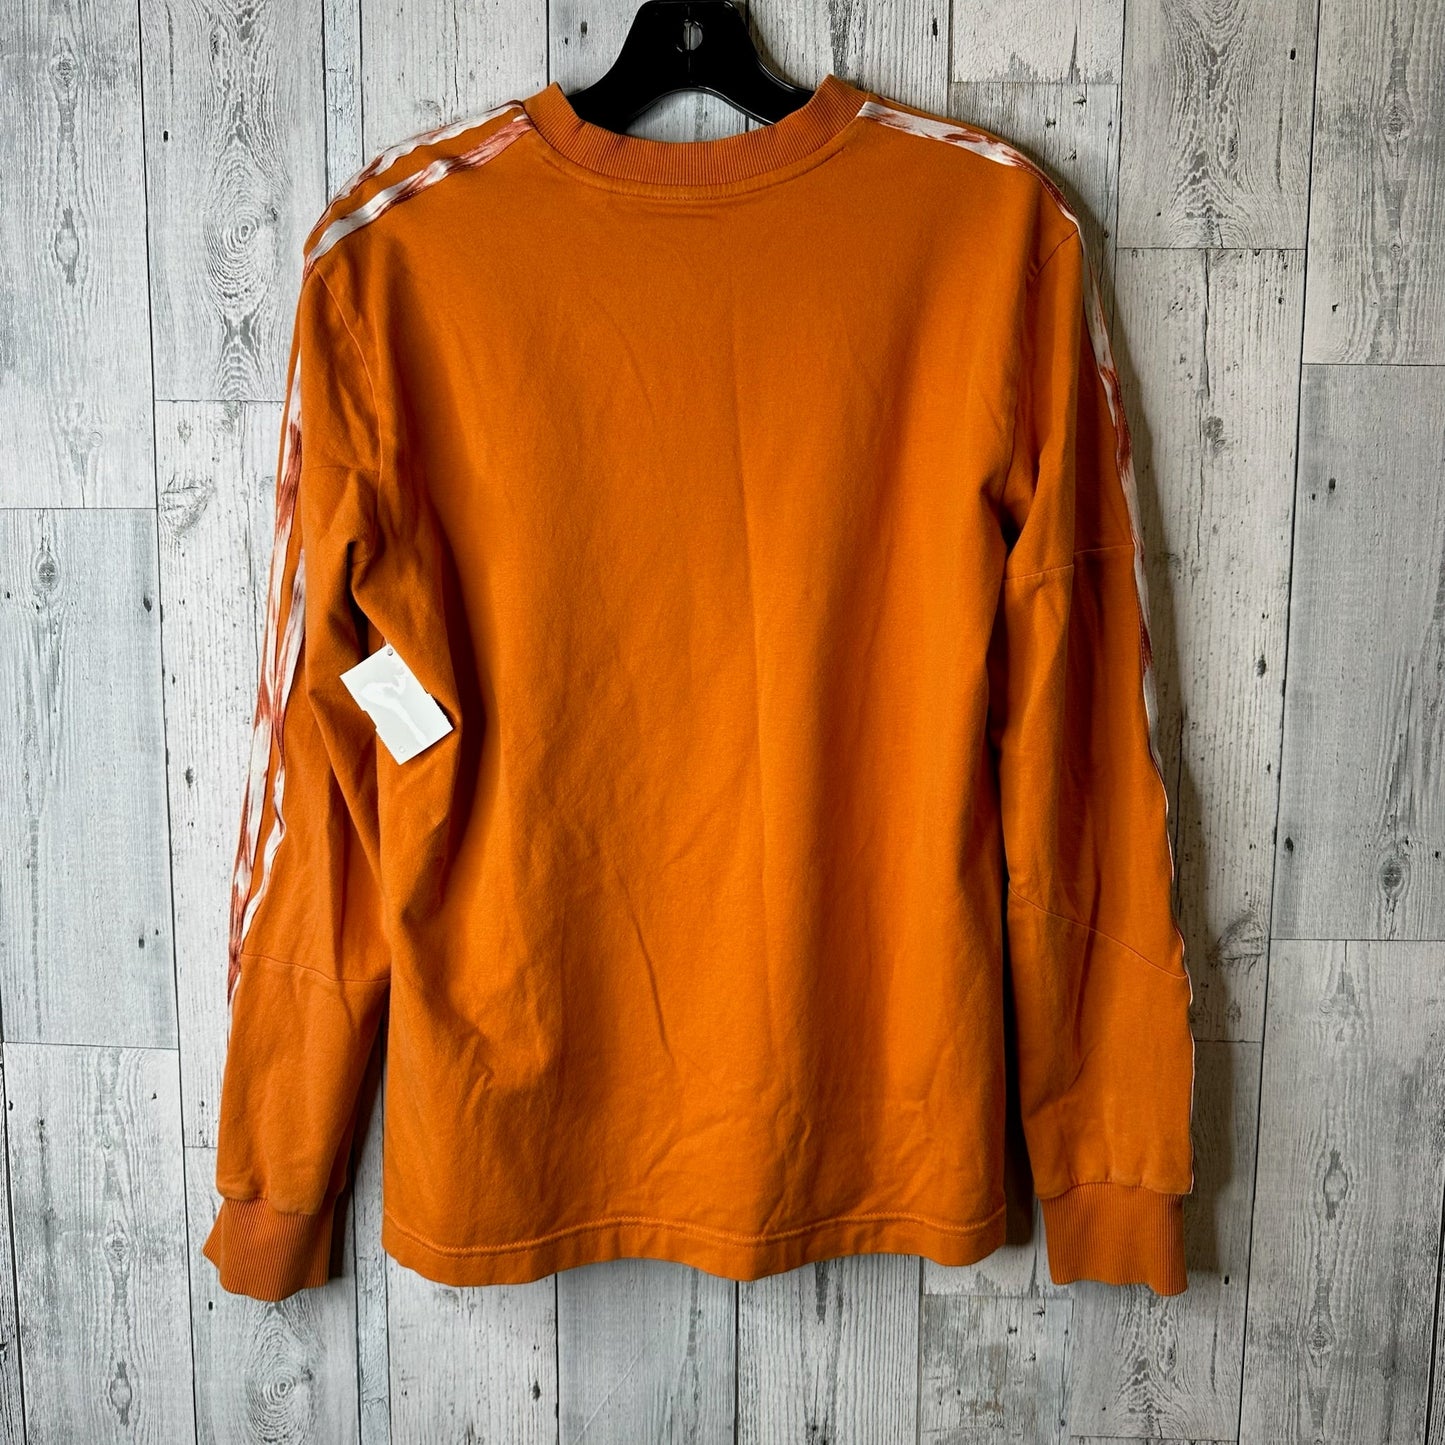 Athletic Top Long Sleeve Crewneck By Adidas  Size: M